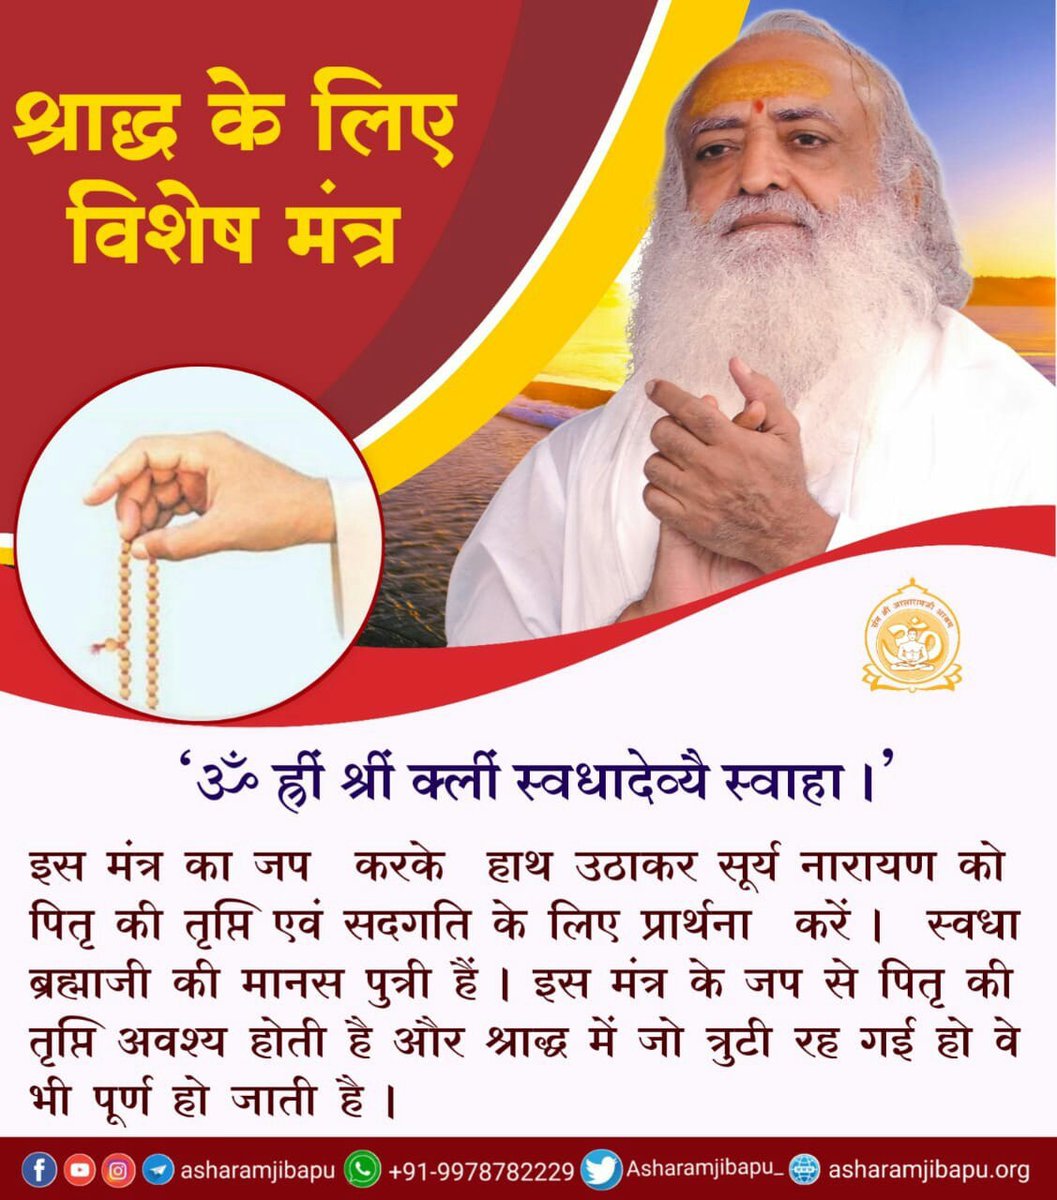 Shraddh Mahima : Sant Shri Asharamji Bapu shares keypoints of Hamari Parampara during Pitra Paksha
*Pitra Tarpan with devotion yields blessings from Demigods
*If Shradh is not performed, Brave healthy progeny aren't born
*Observing Celibacy is a must